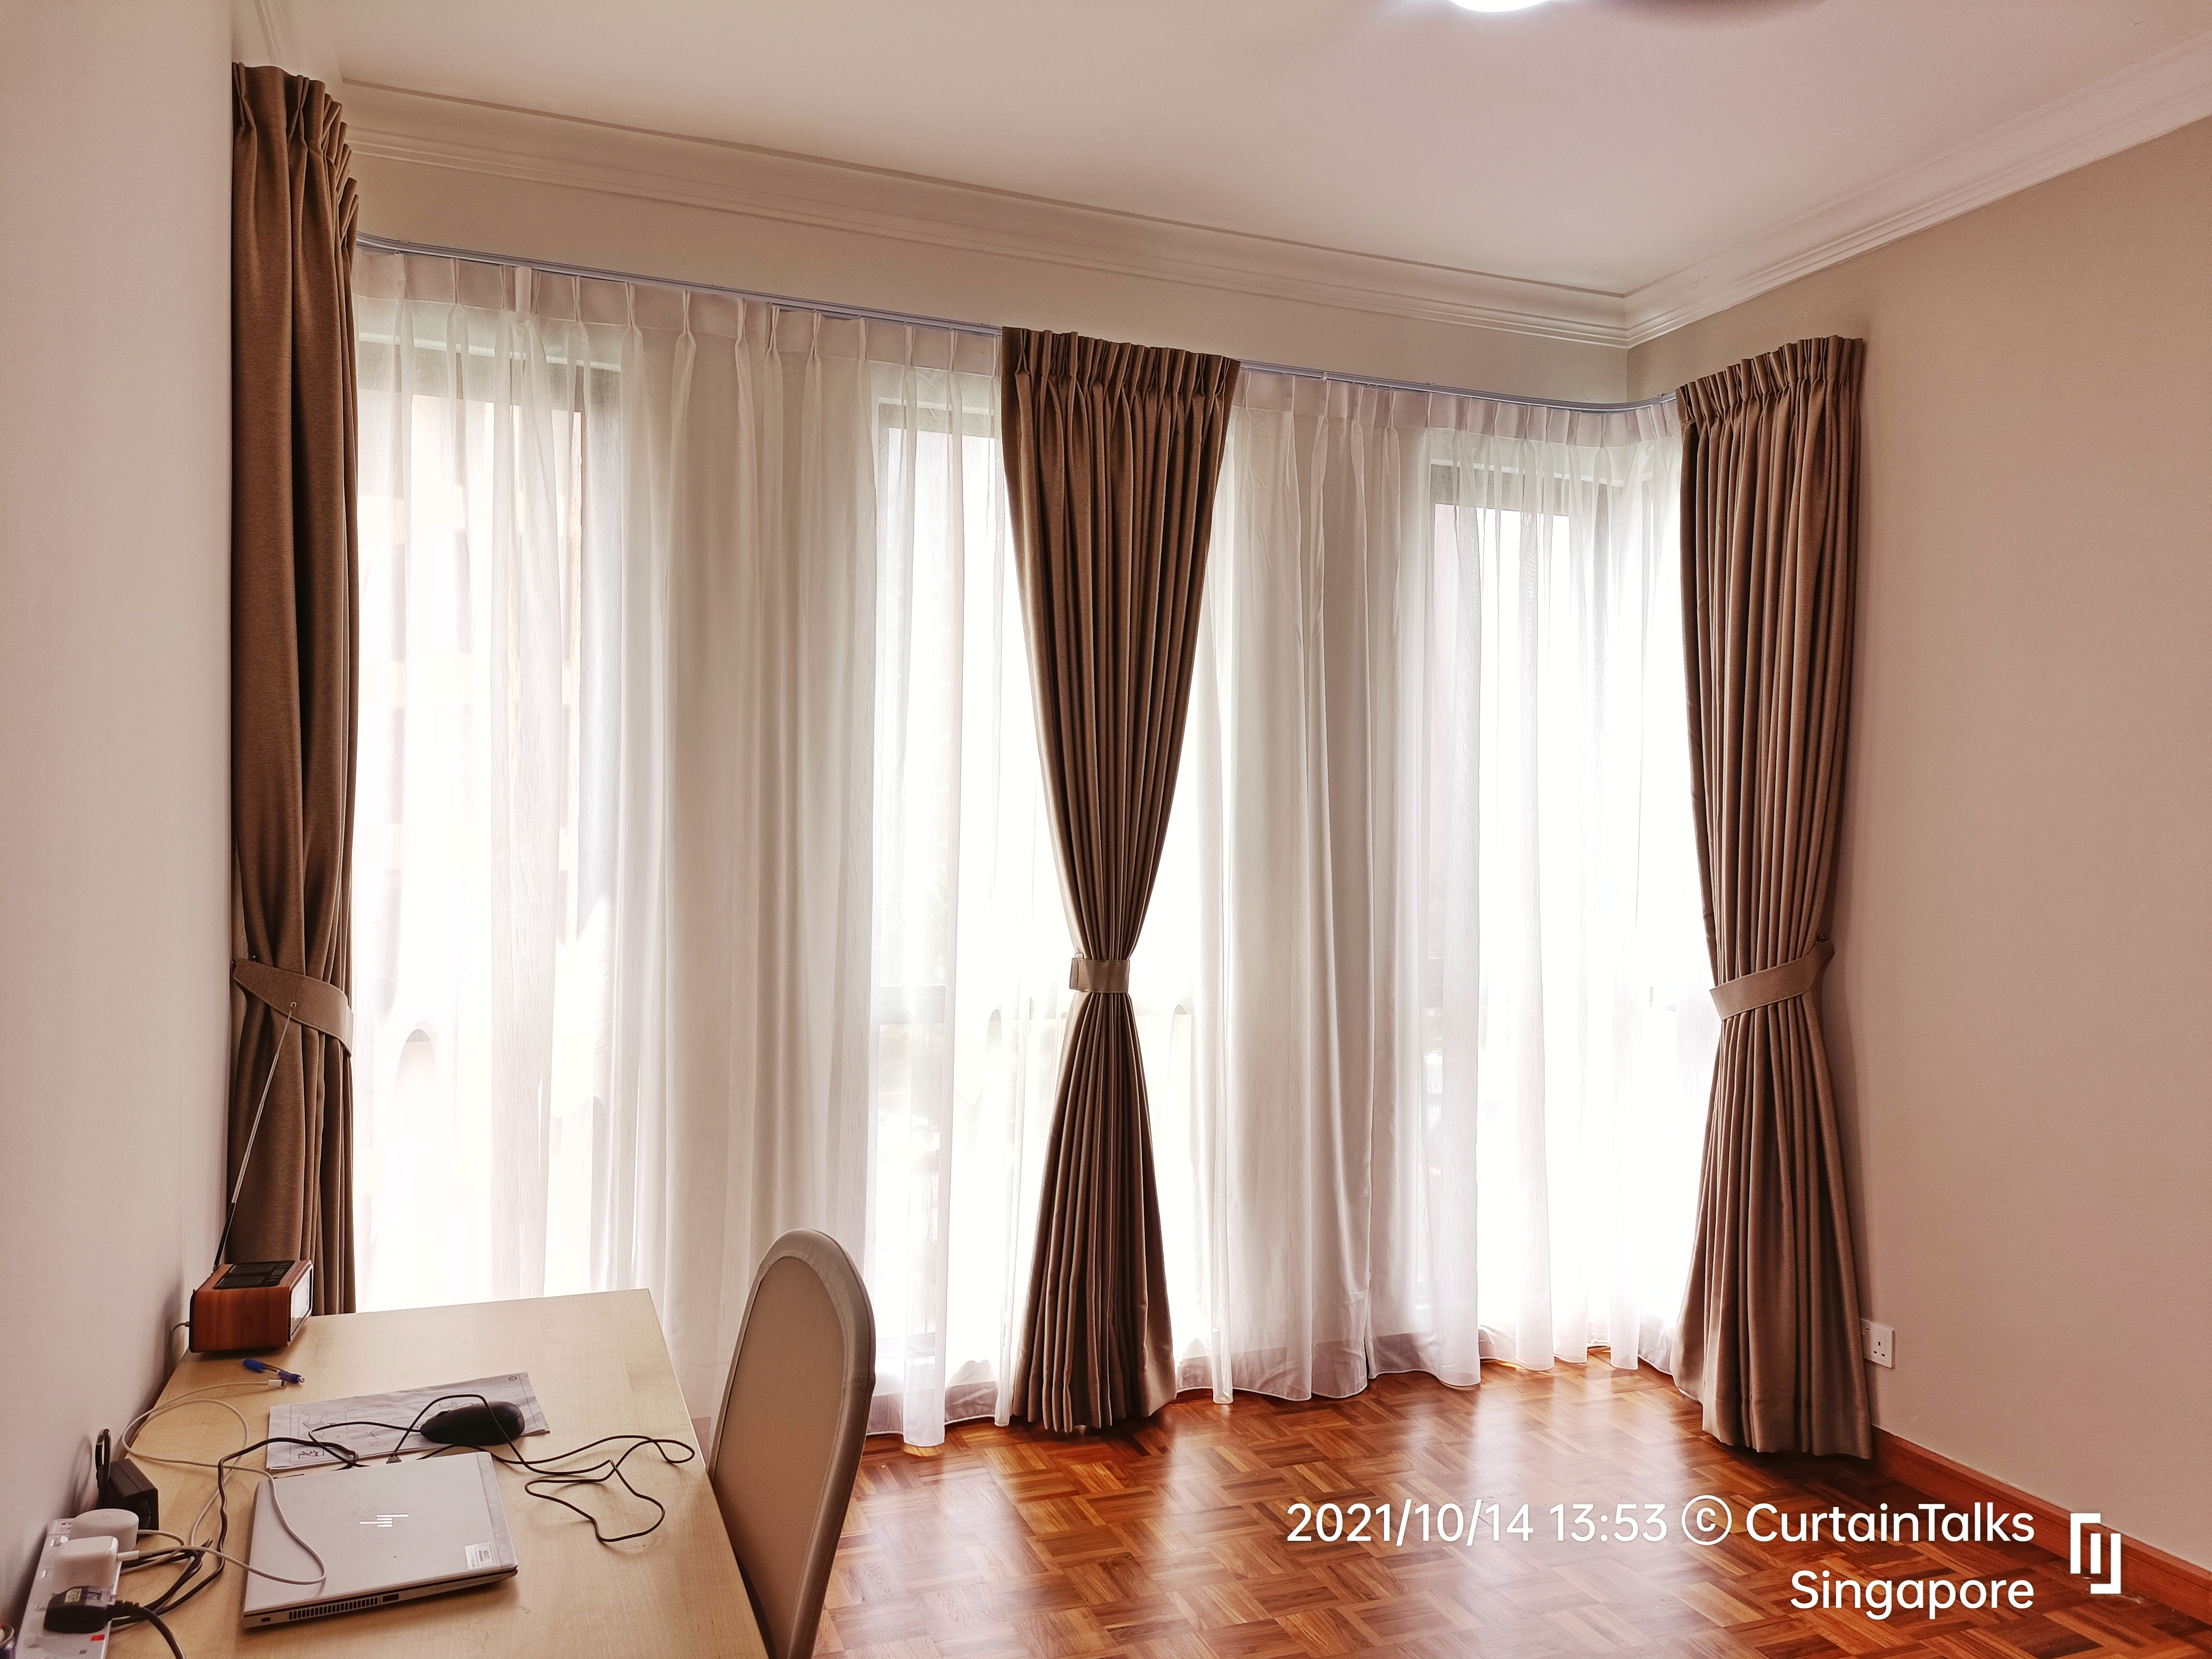 This is a Picture of Day and night curtain at 5 Pemimpin Dr, Singapore 5761495. White sheer,beige color night curtain